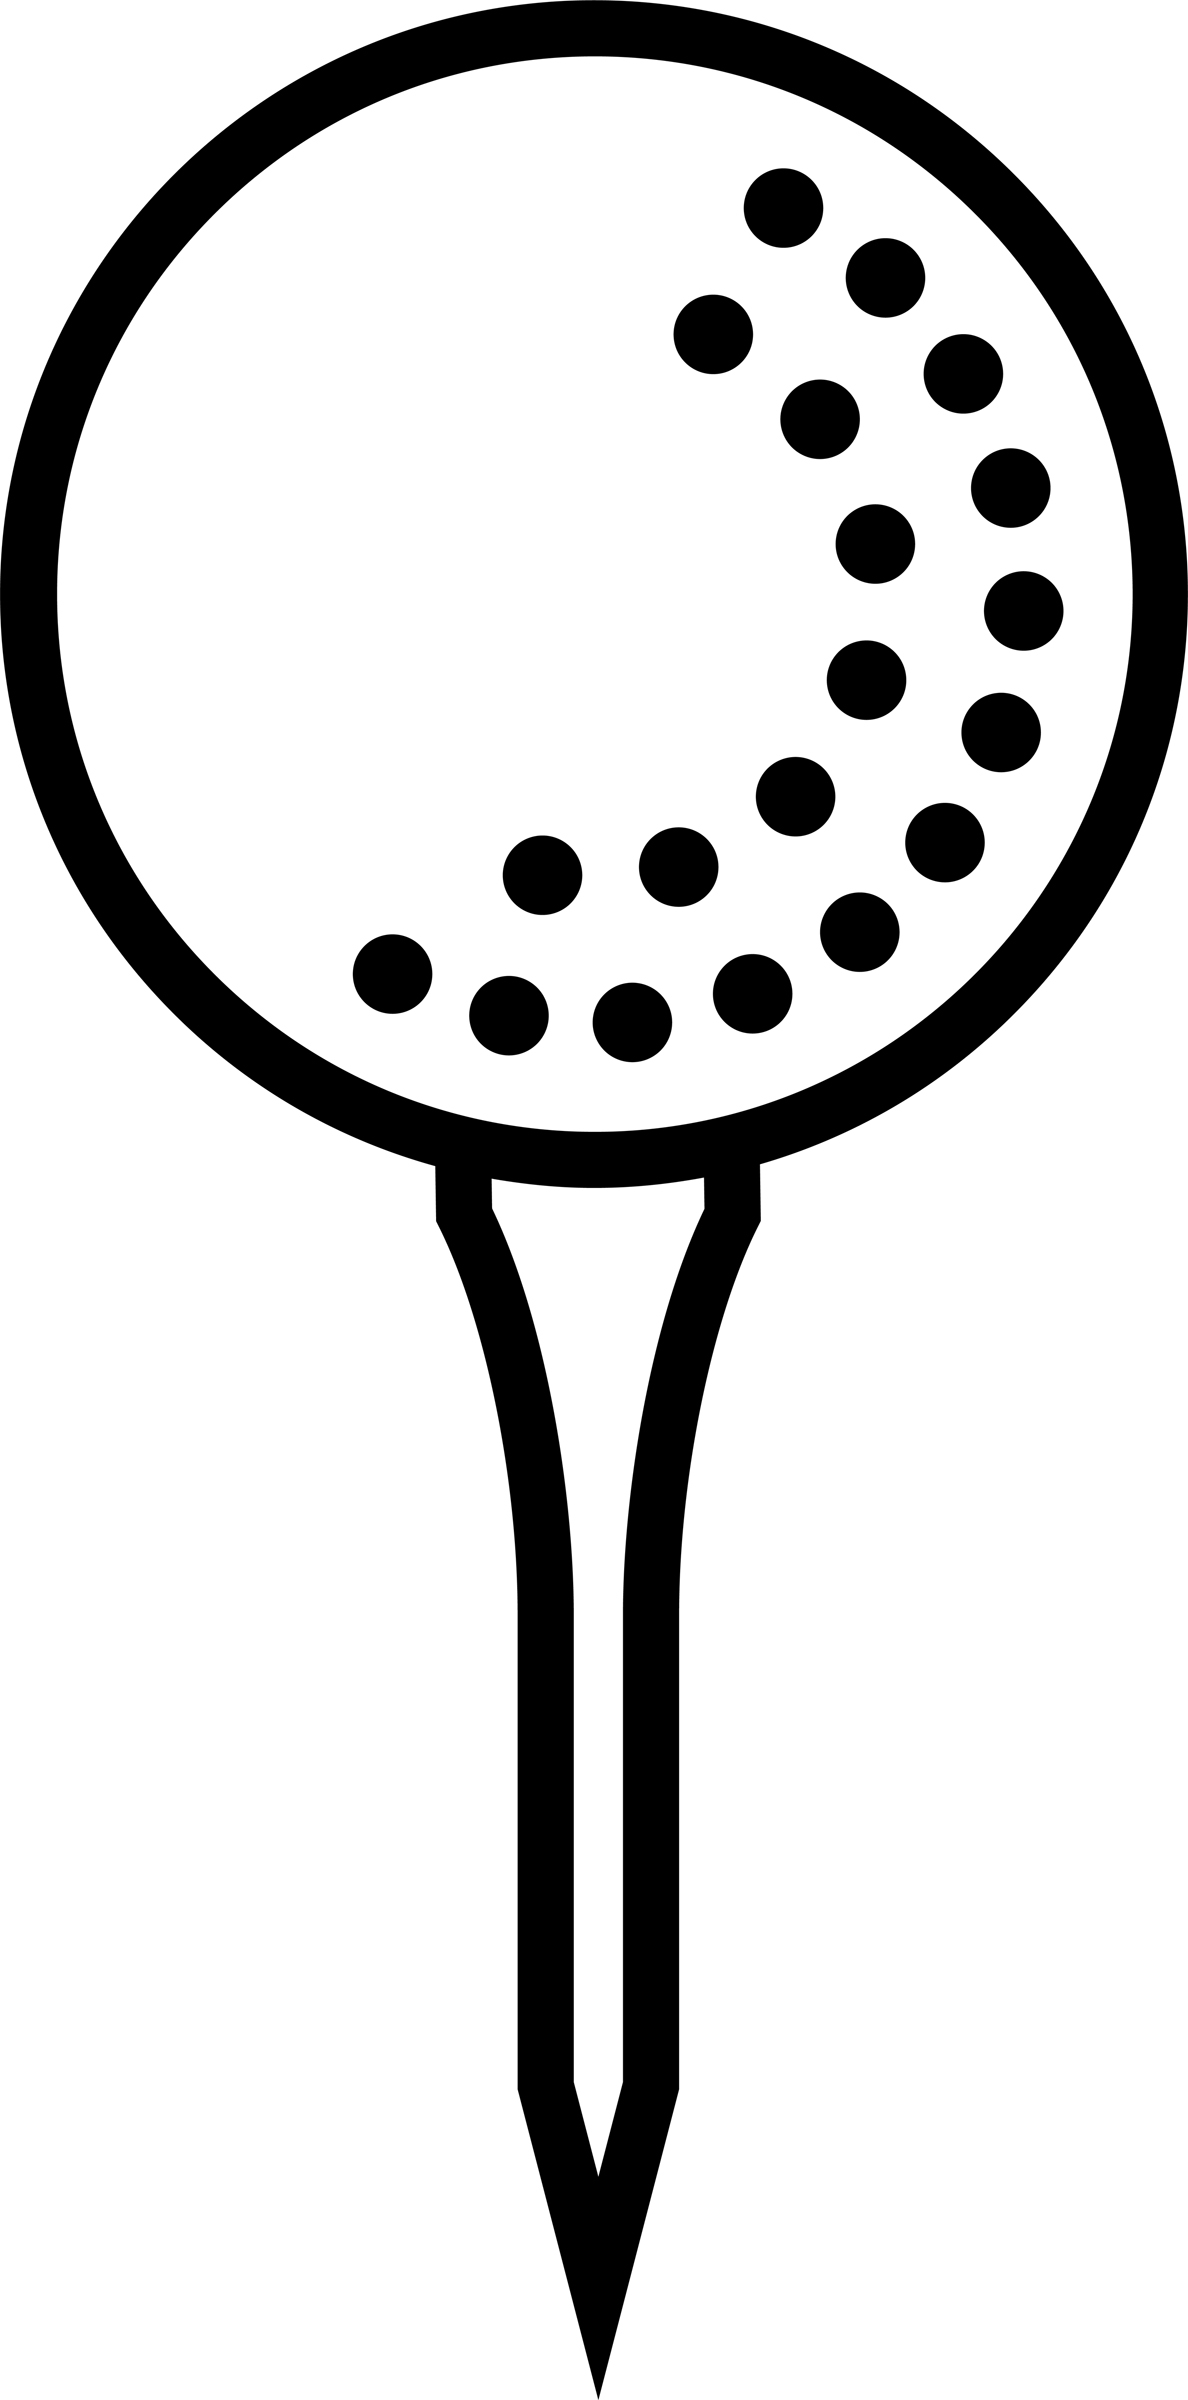 Golfer Golf Images Graphics Animated 2 Wikiclipart Clipart